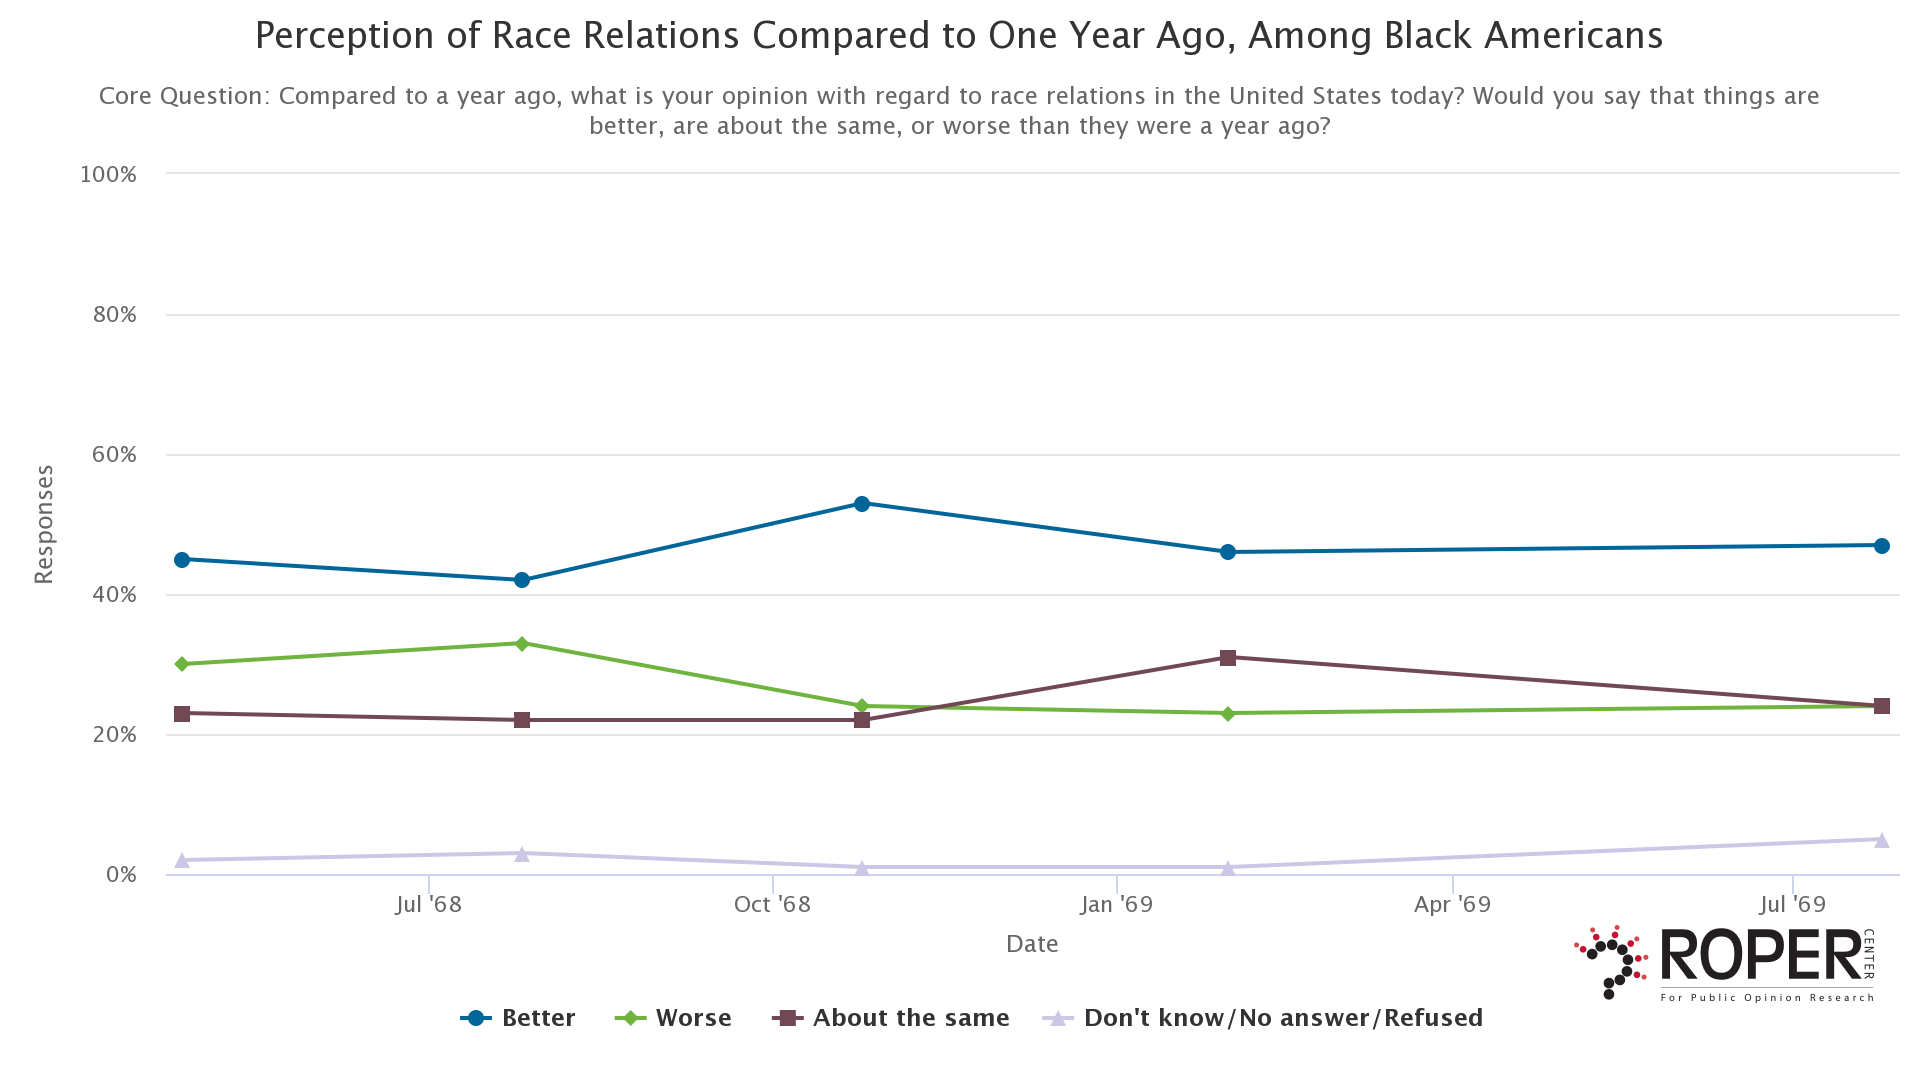 Perception of Race Relations Compared to One Year Ago, Among Black Americans (1968 - 1969)